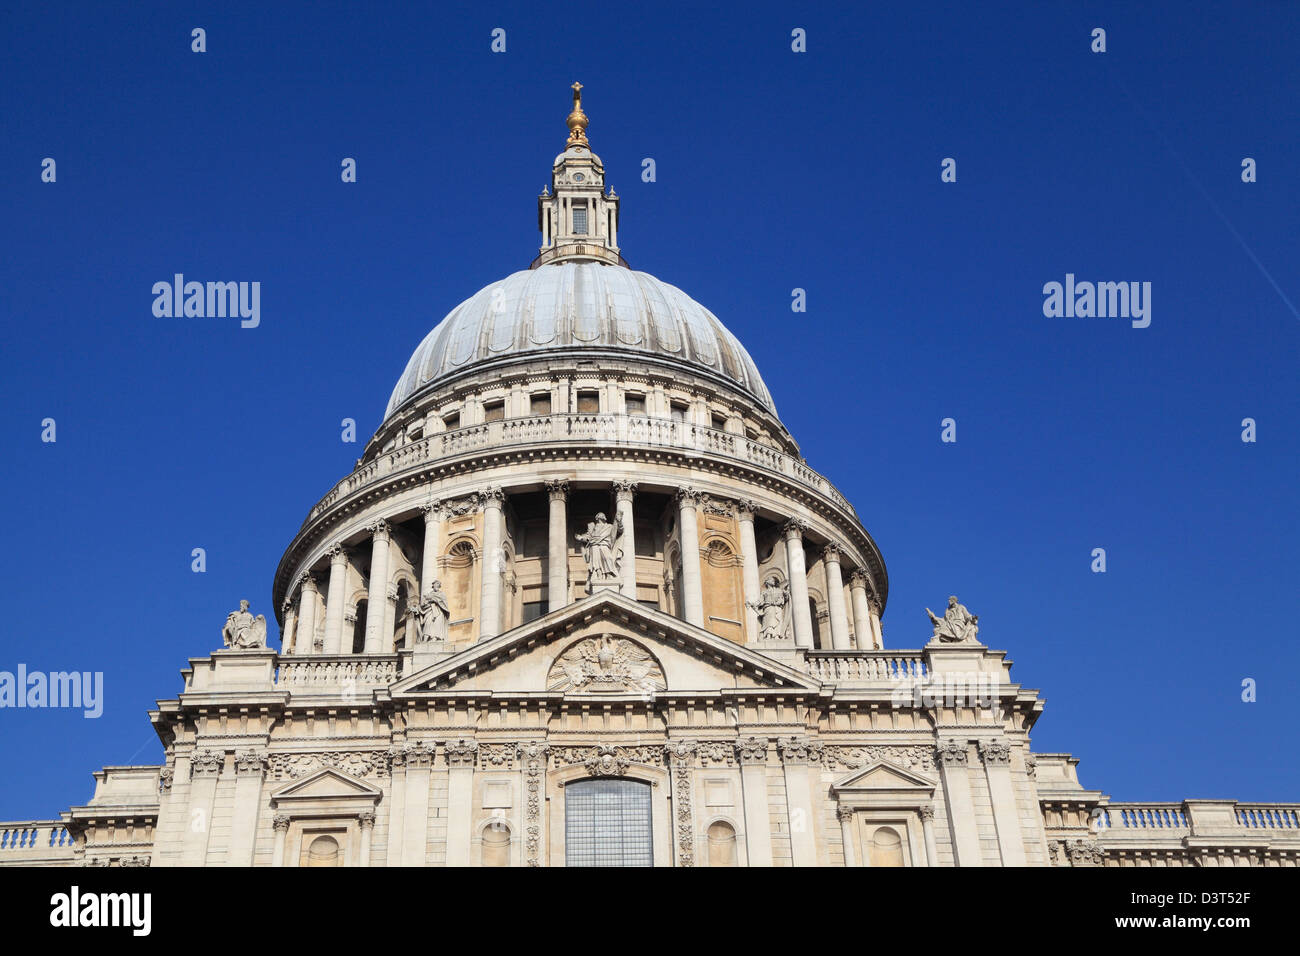 The dome of St Paul's Cathedral, City of London, England, Great Britain, UK, GB Stock Photo